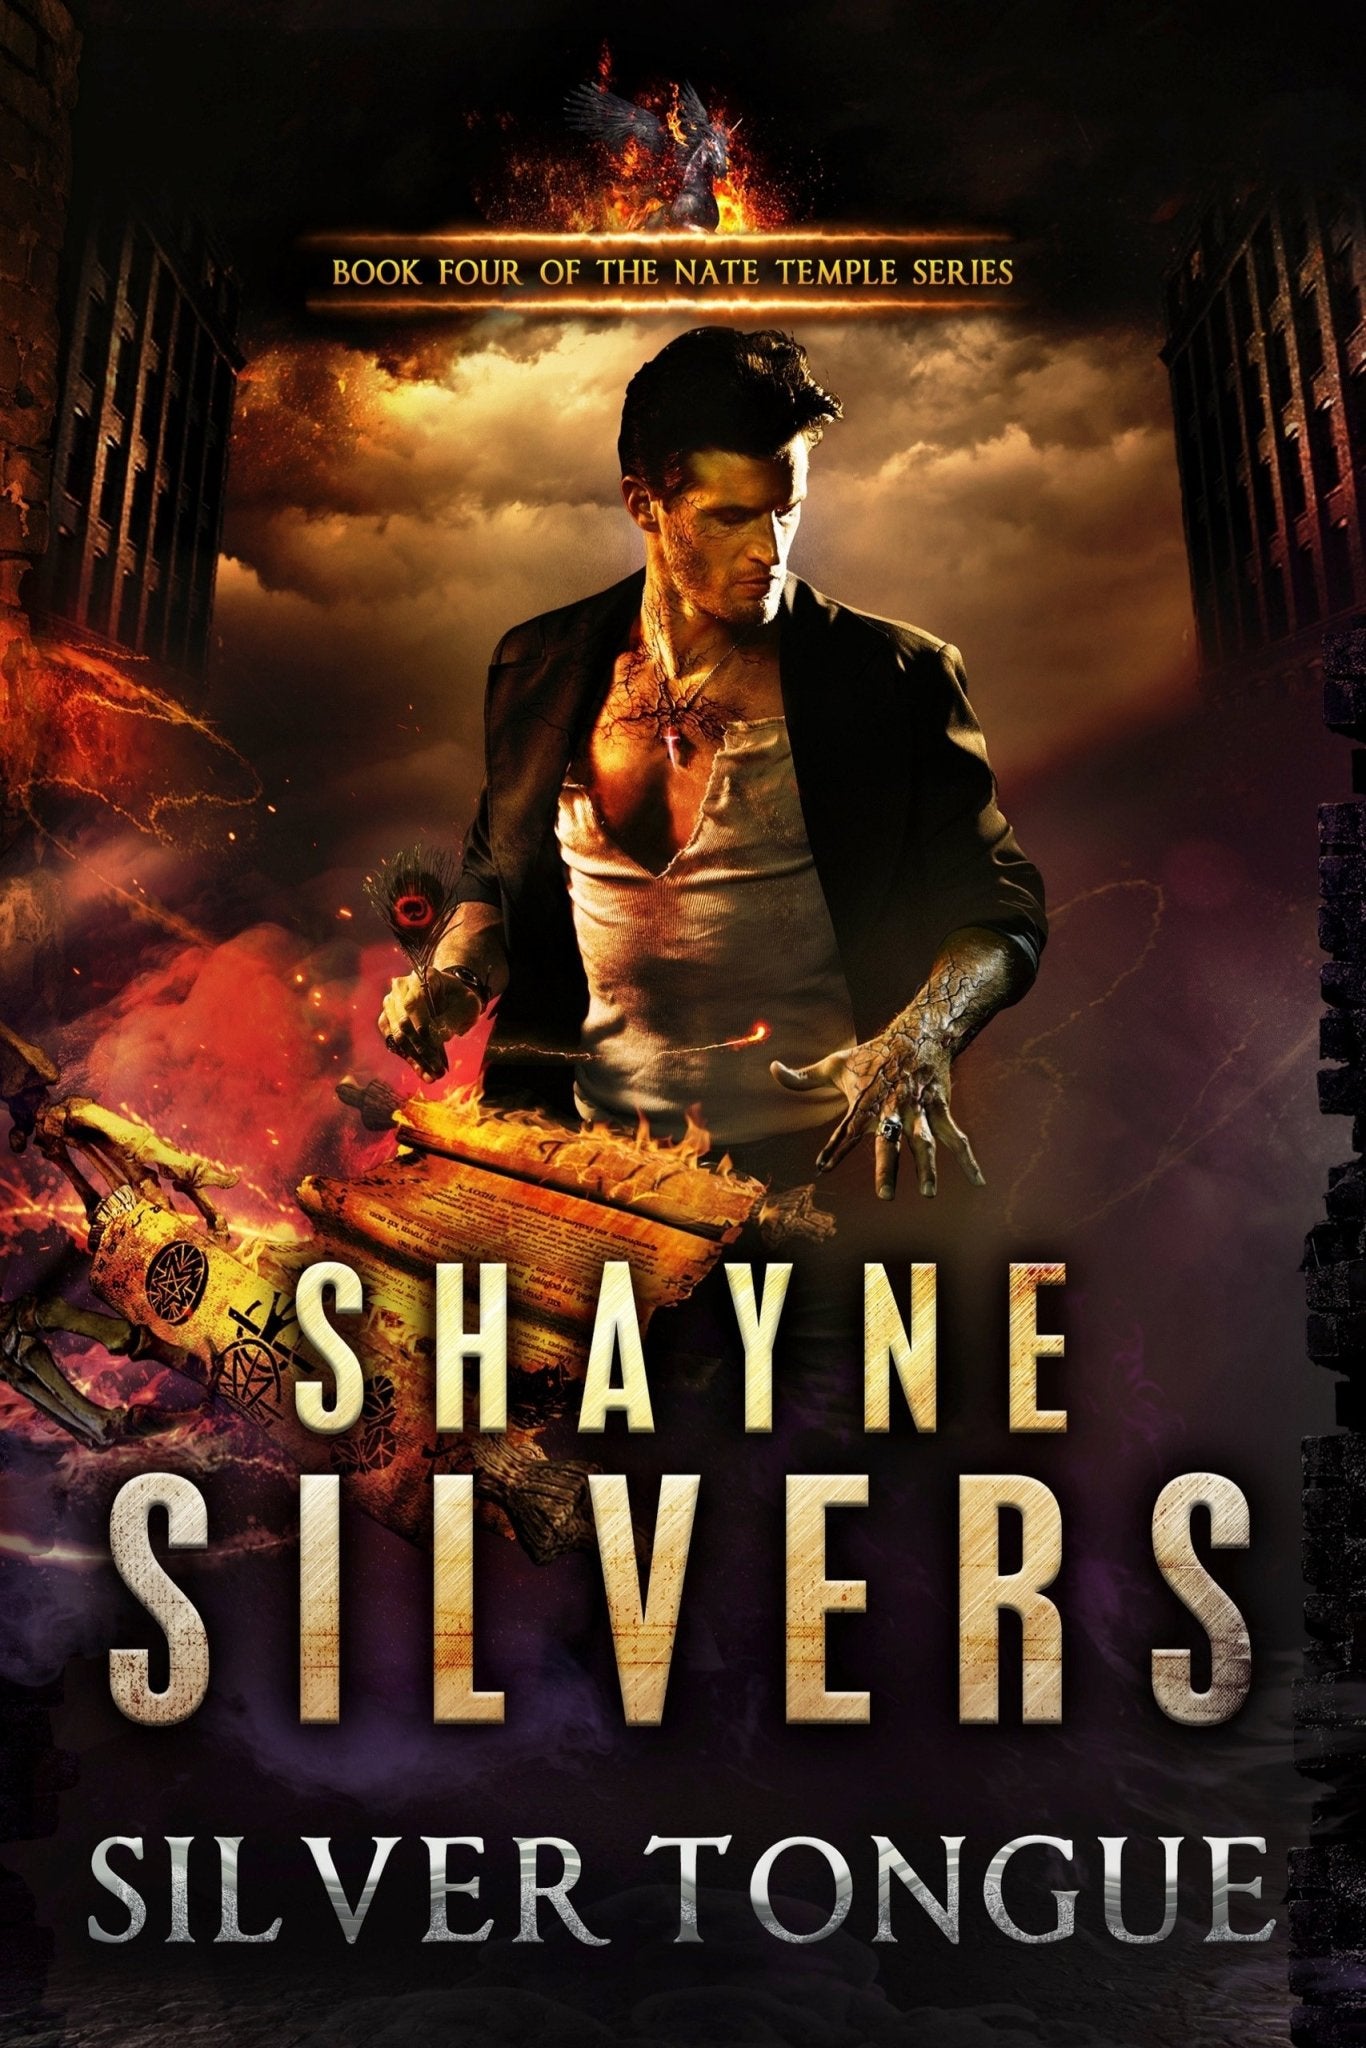 Silver Tongue: A Nate Temple Series Book 4 (Signed Paperback) - Temple Verse Gear